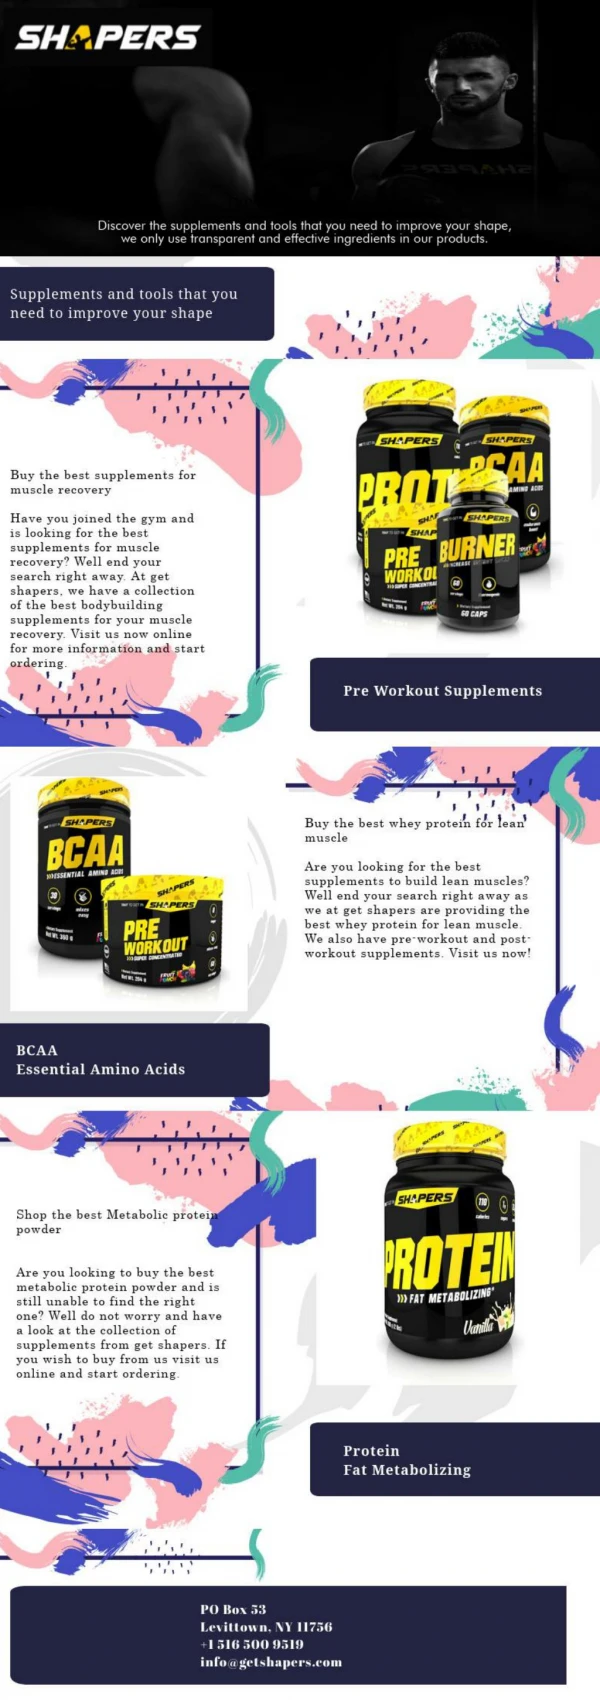 Shapers - Your One Stop Shop For Fitness Supplements